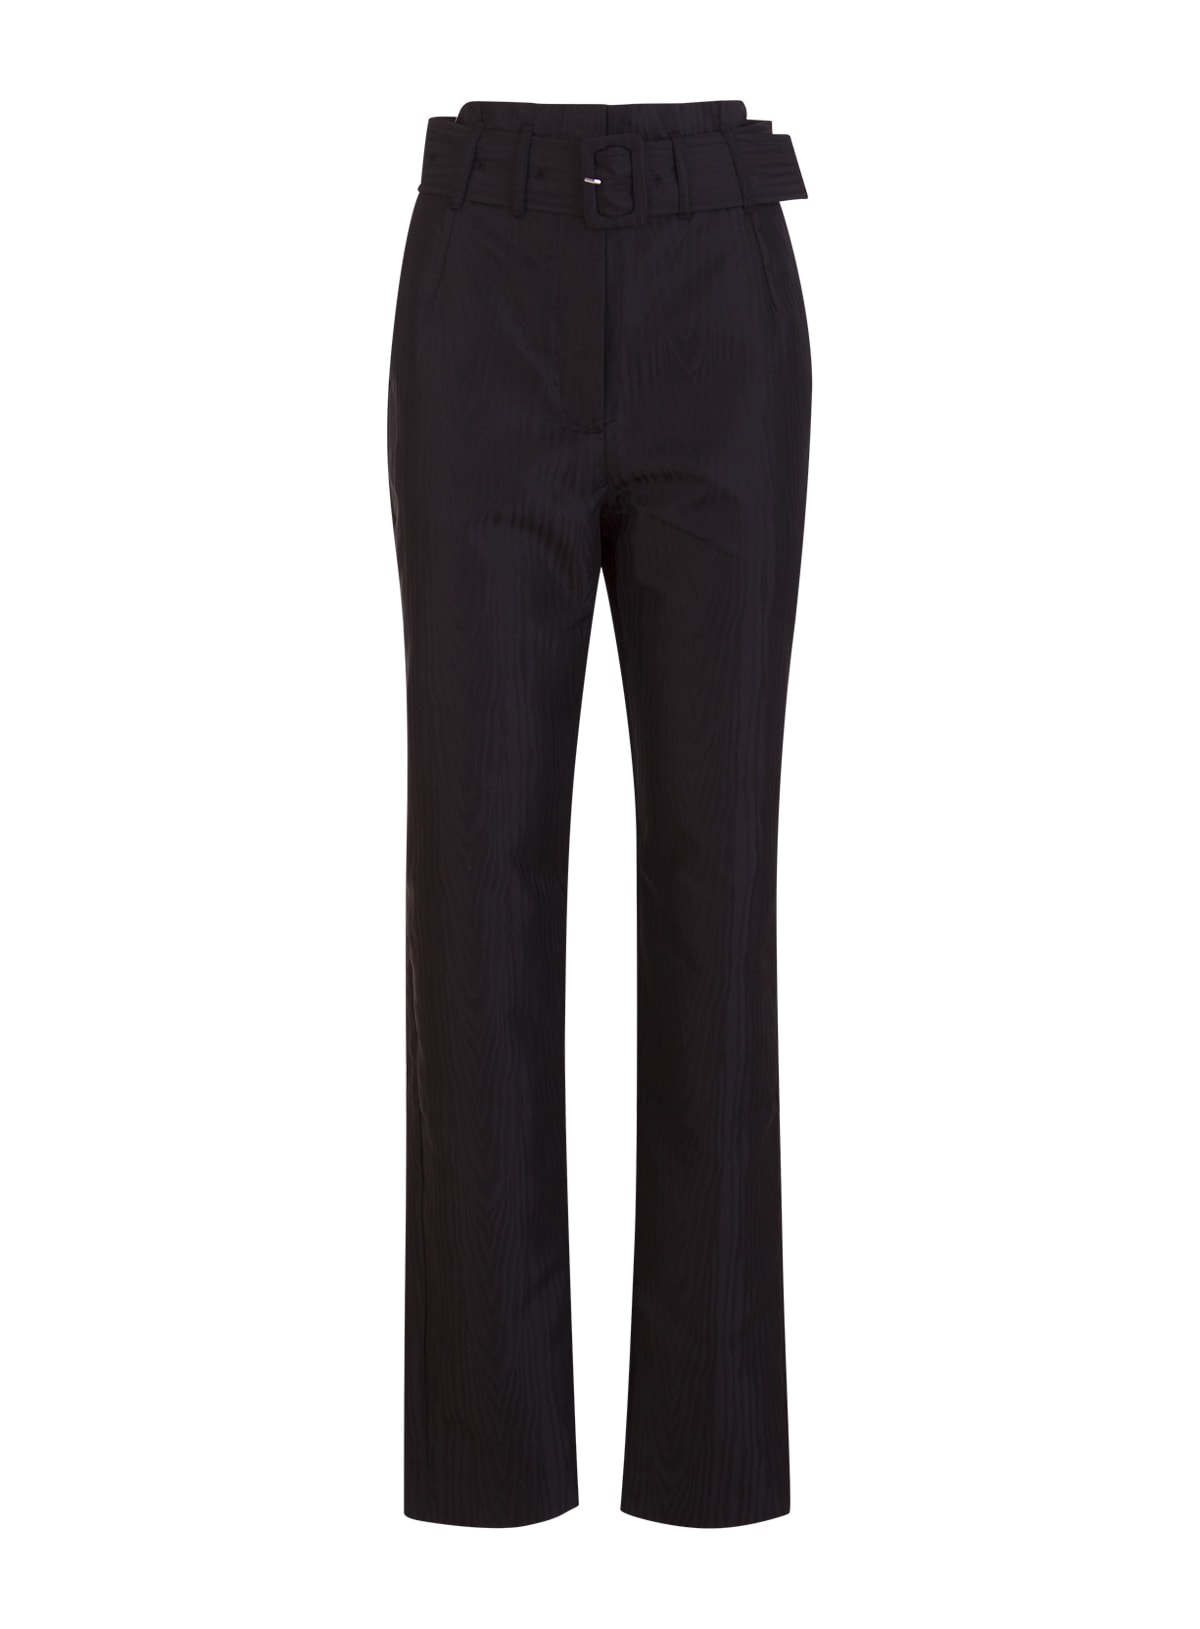 Rotate by Birger Christensen Rotate Sia Trousers